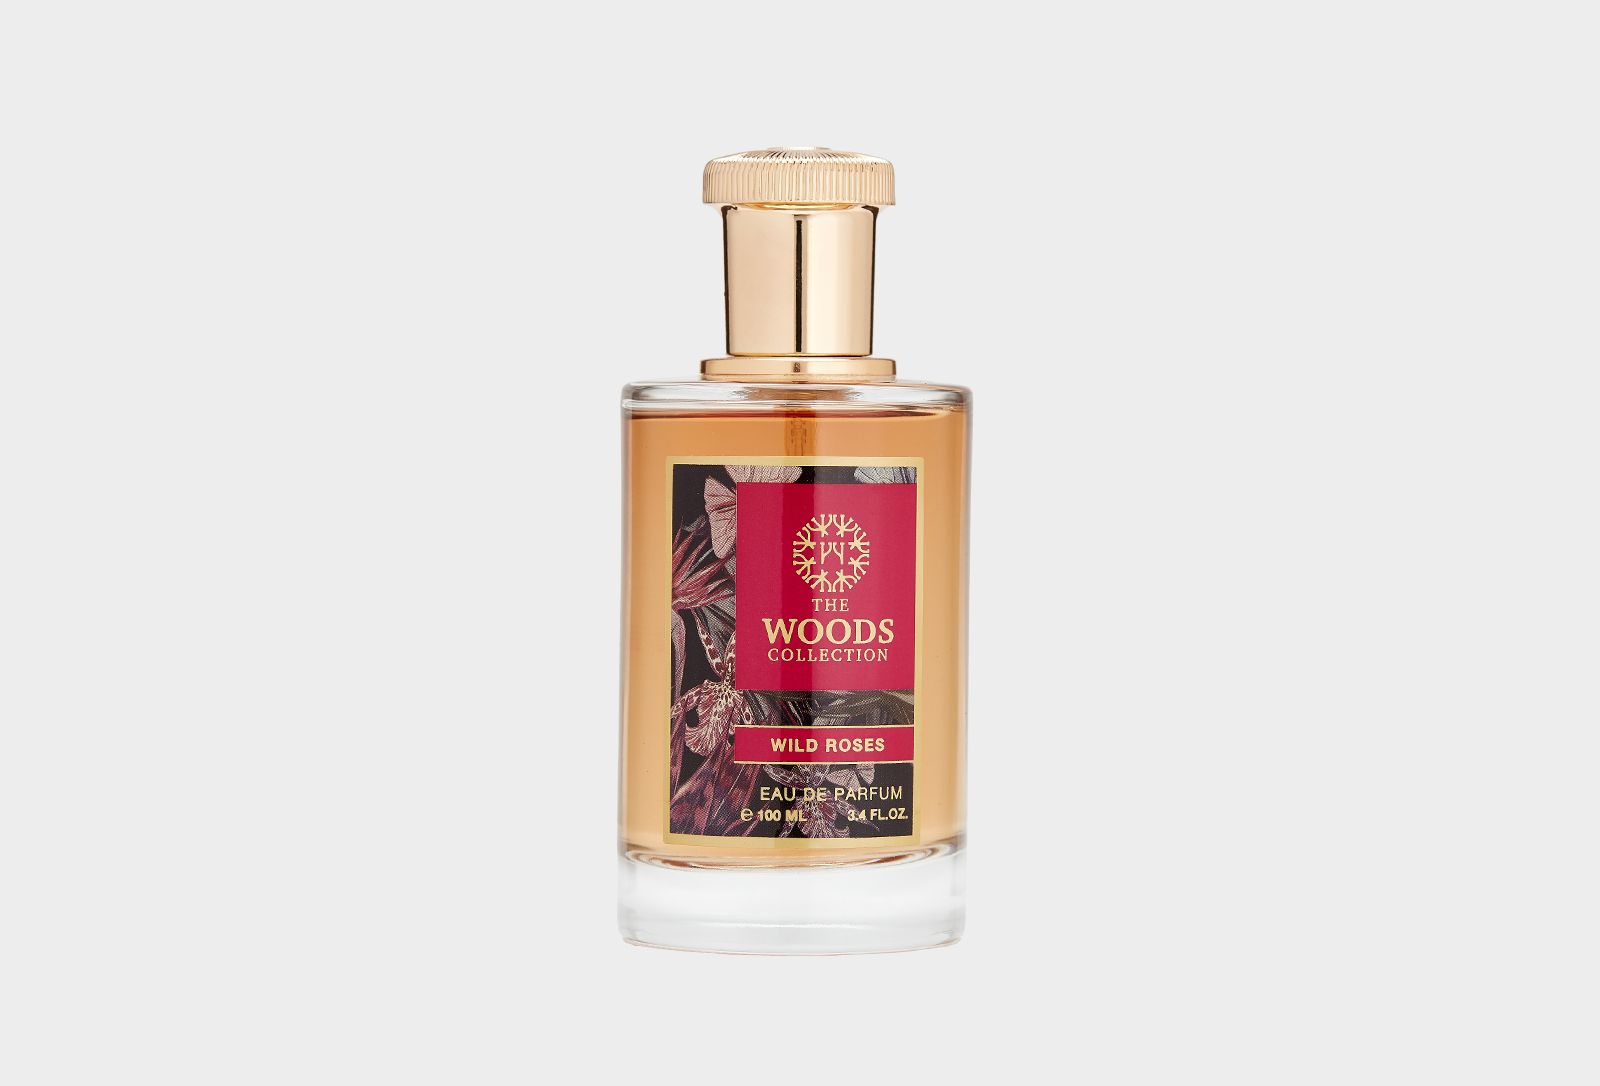 Wild collection. Woods collection духи Wild Roses. The Woods collection. The Woods collection: Wild Roses EDP. Wood collection Wild Roses Mist hair.